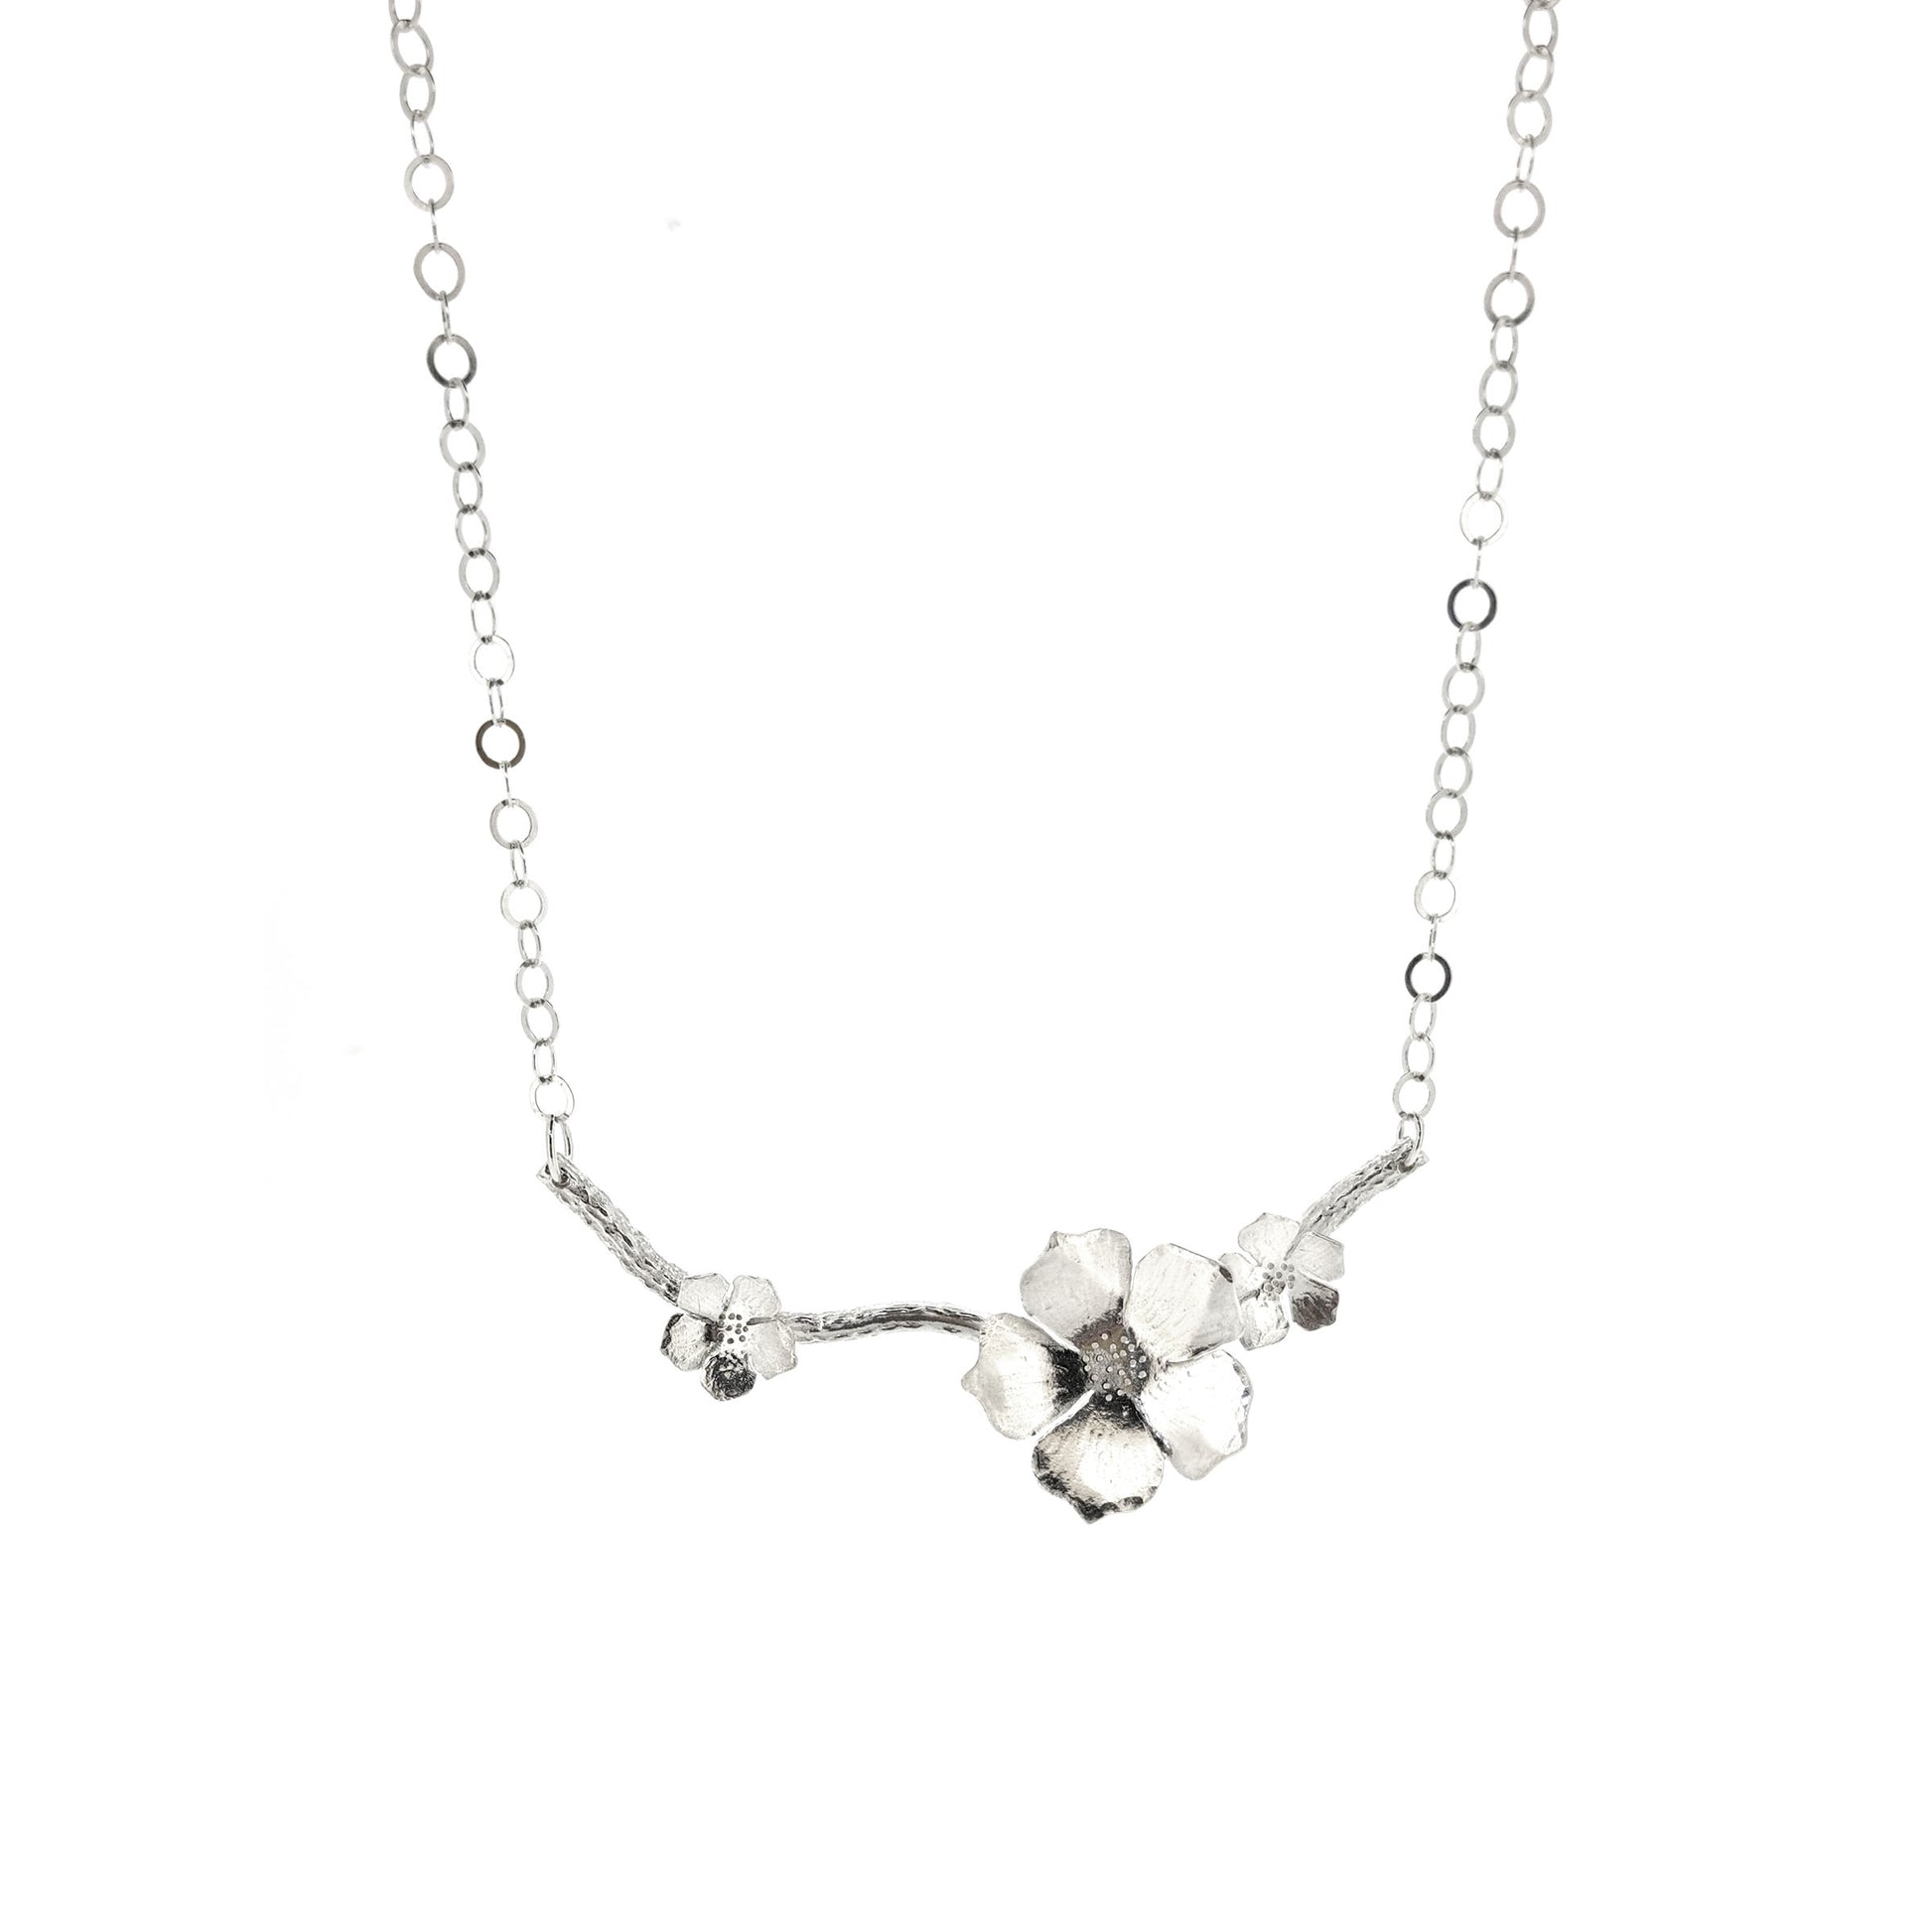 Silver branch necklace with three blossom flowers and open large link chain.